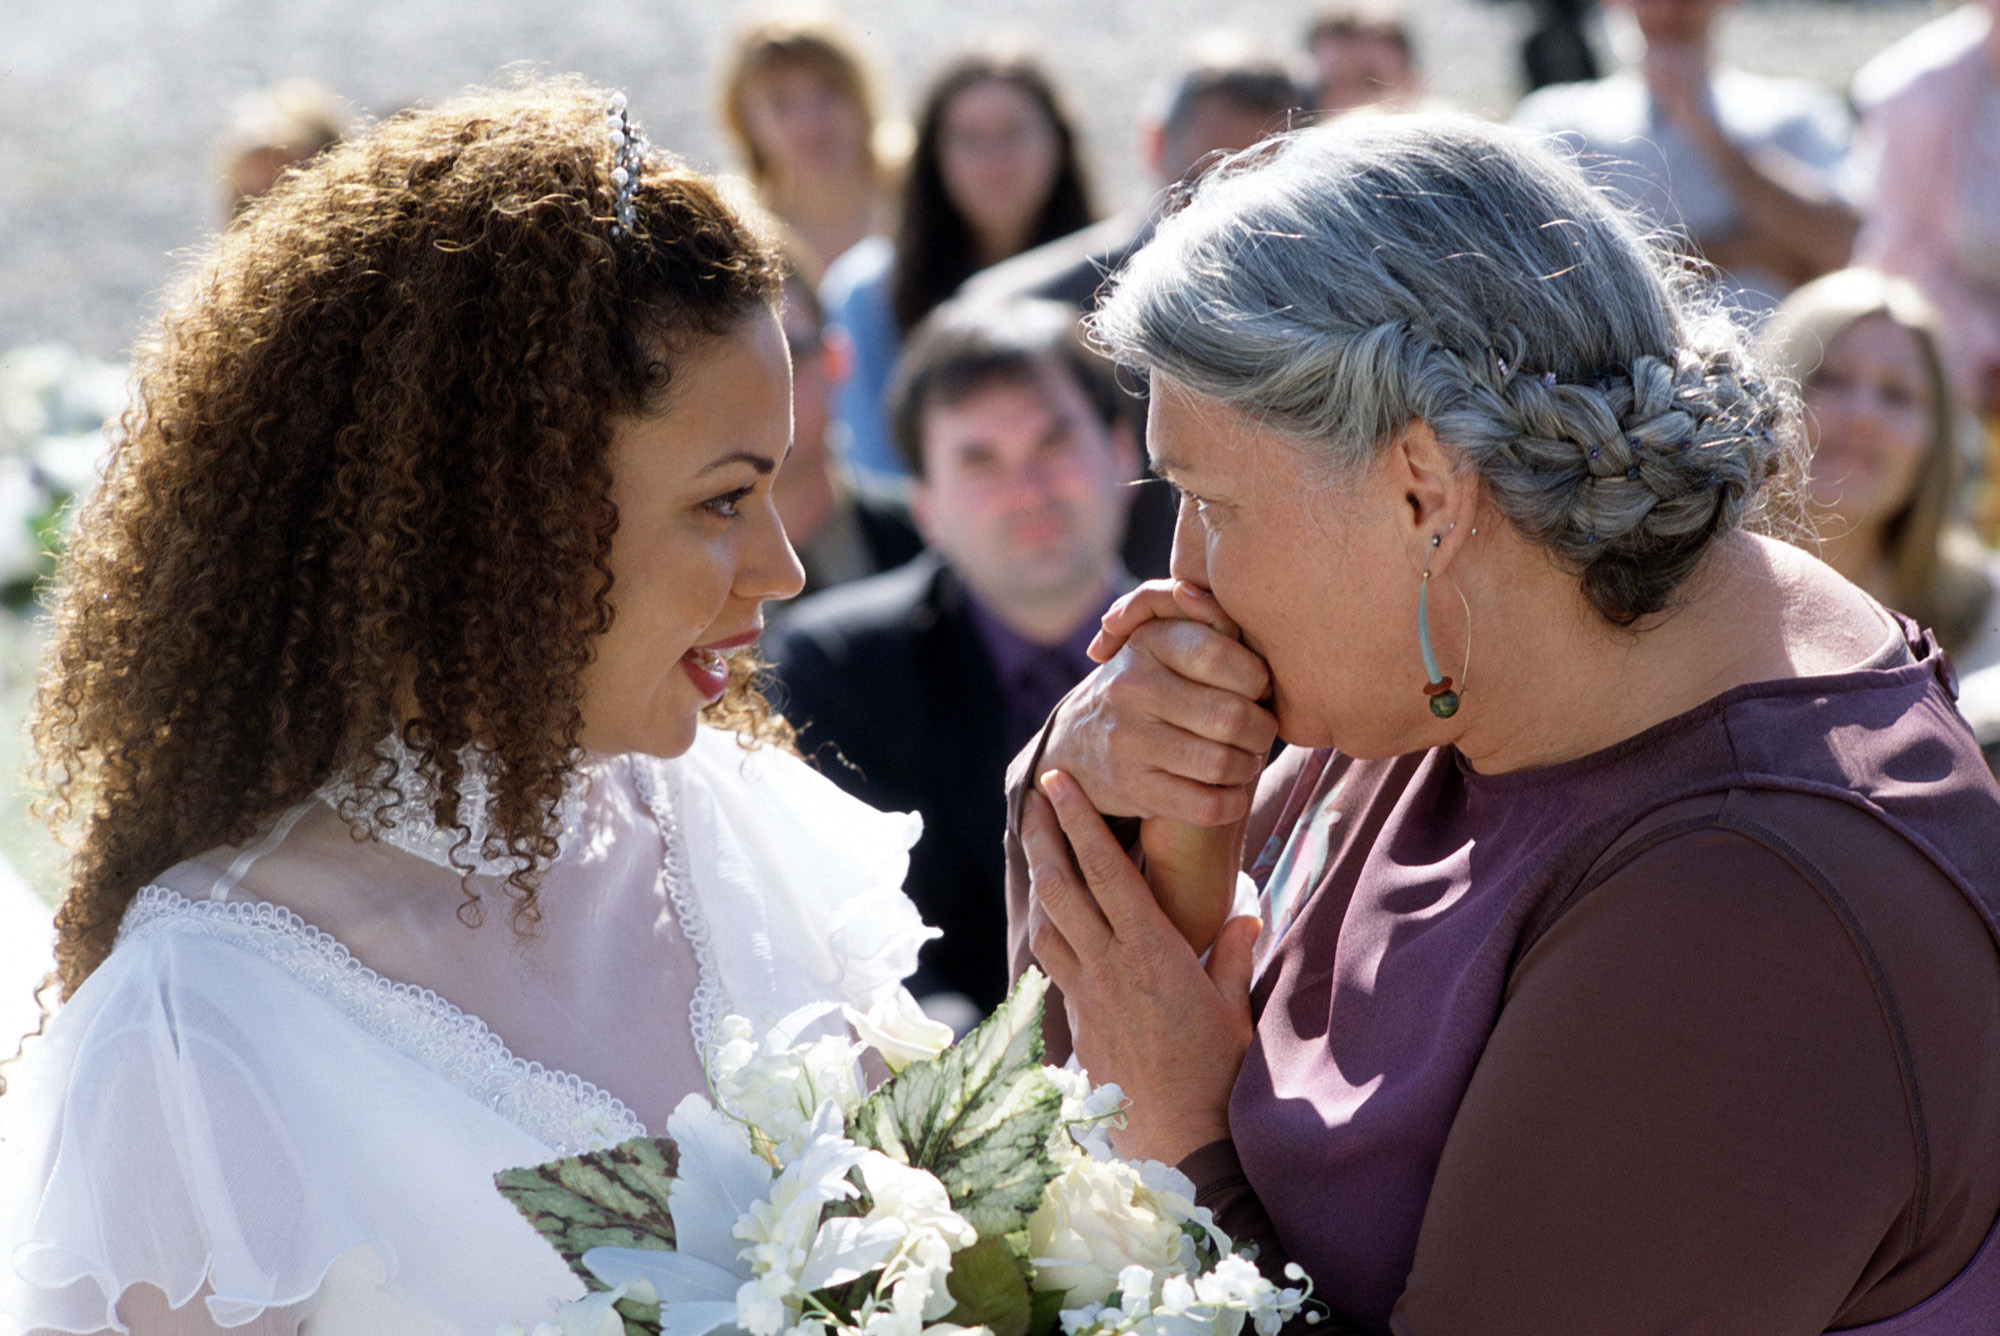 Kathryne Dora Brown and Tyne Daly starred in "The Wedding Dress," which was broadcast on October 28, 2001 | Source: Getty Images